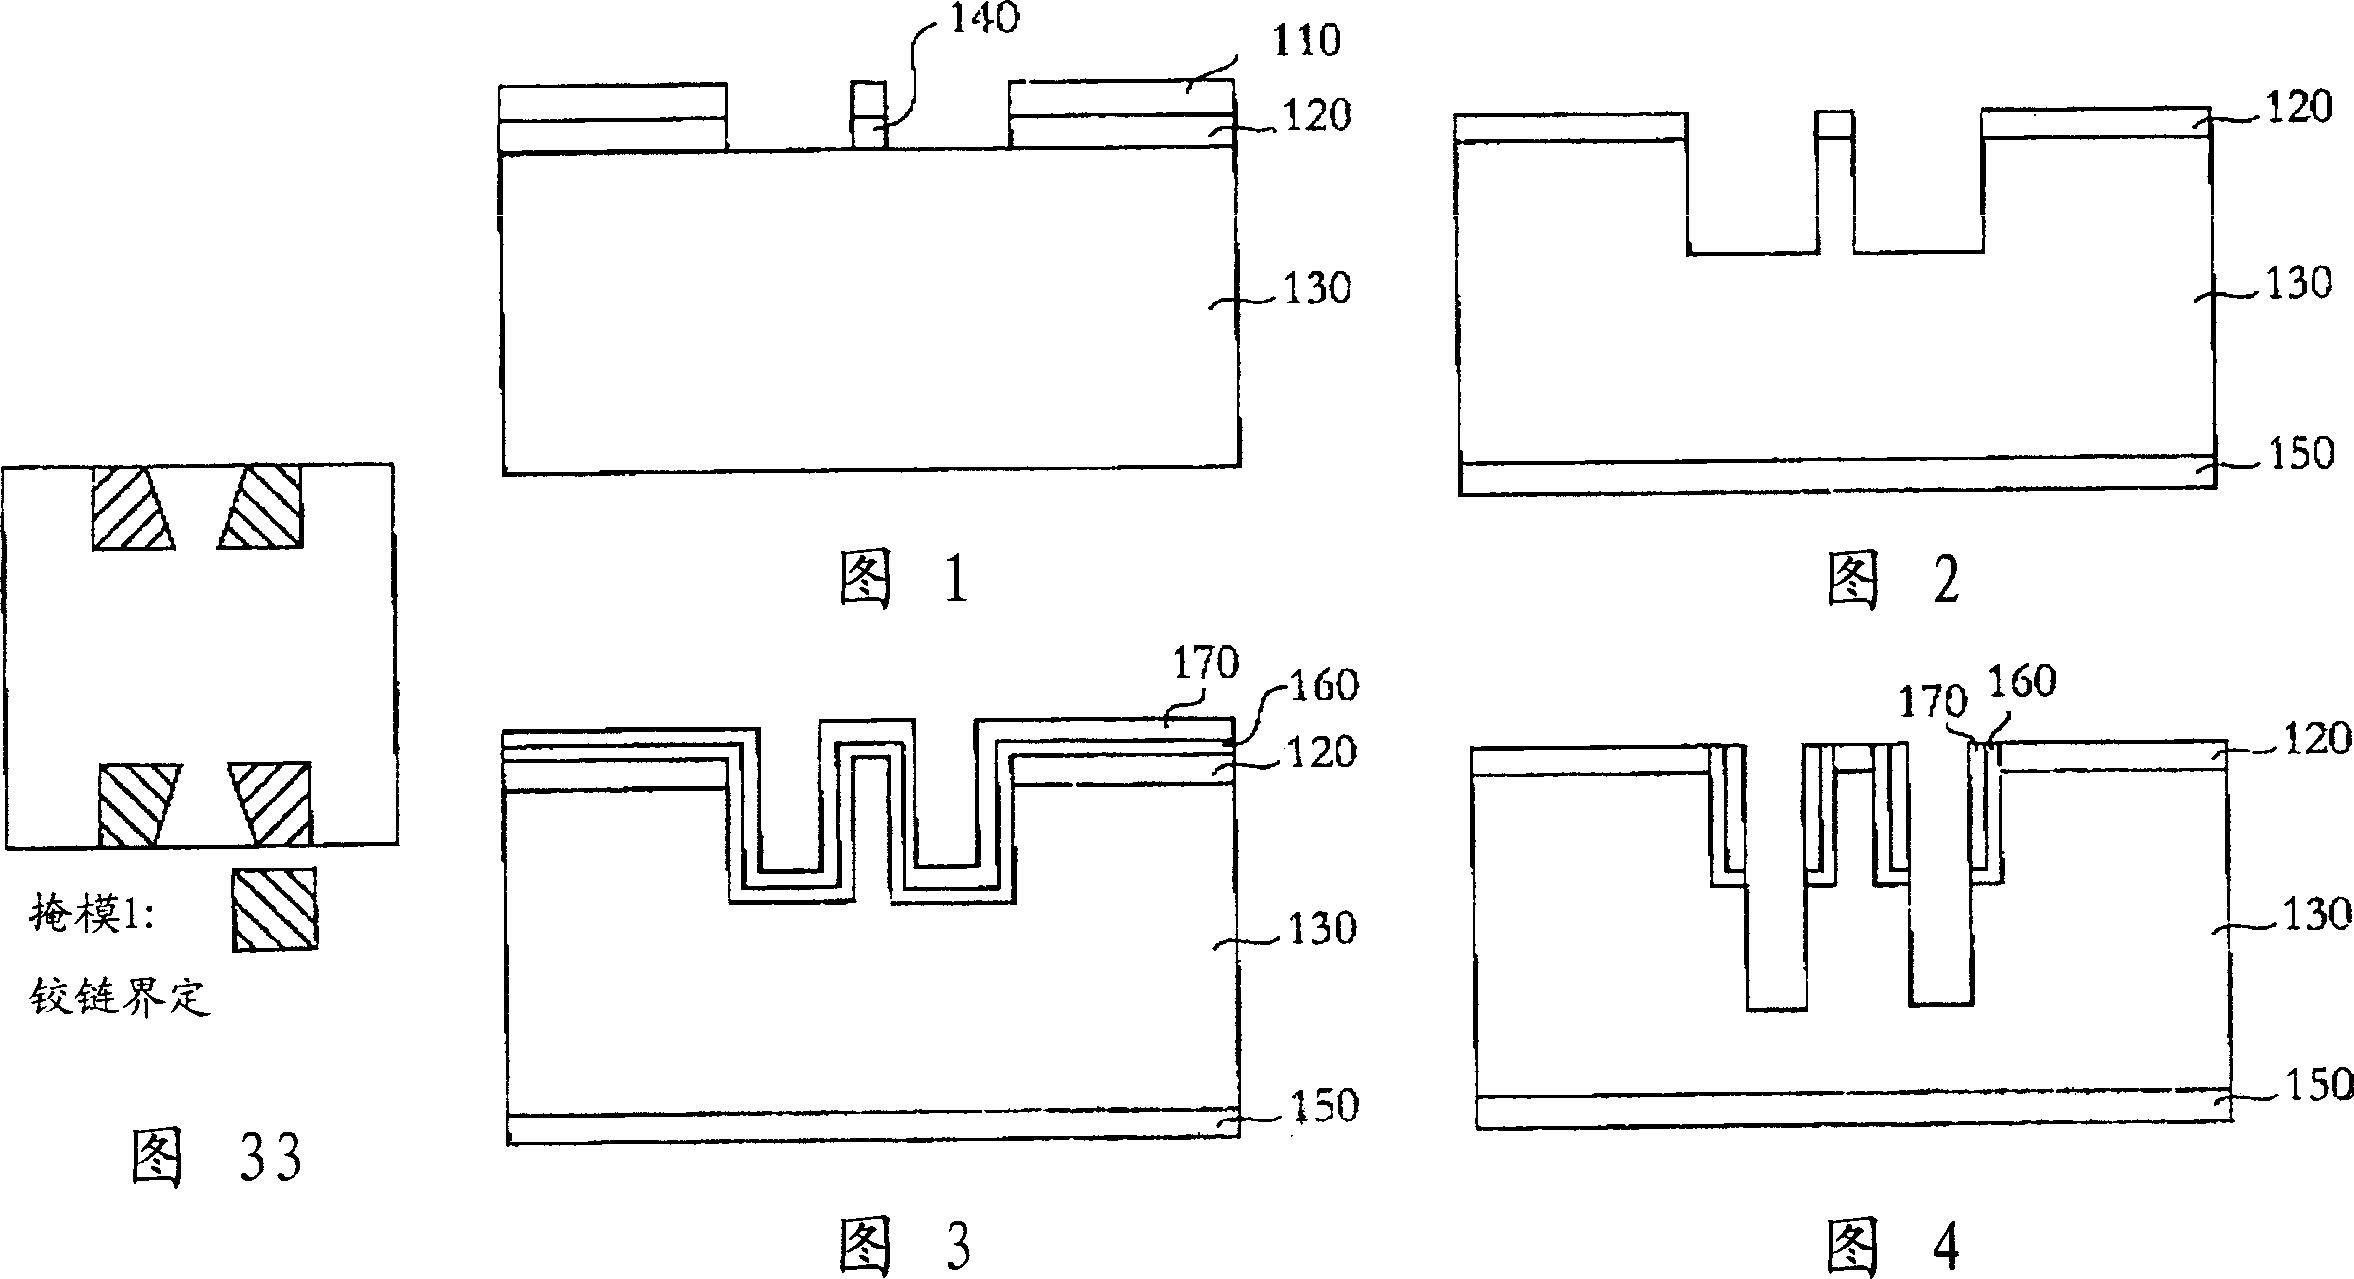 Hinge concealed micro electromechanical device